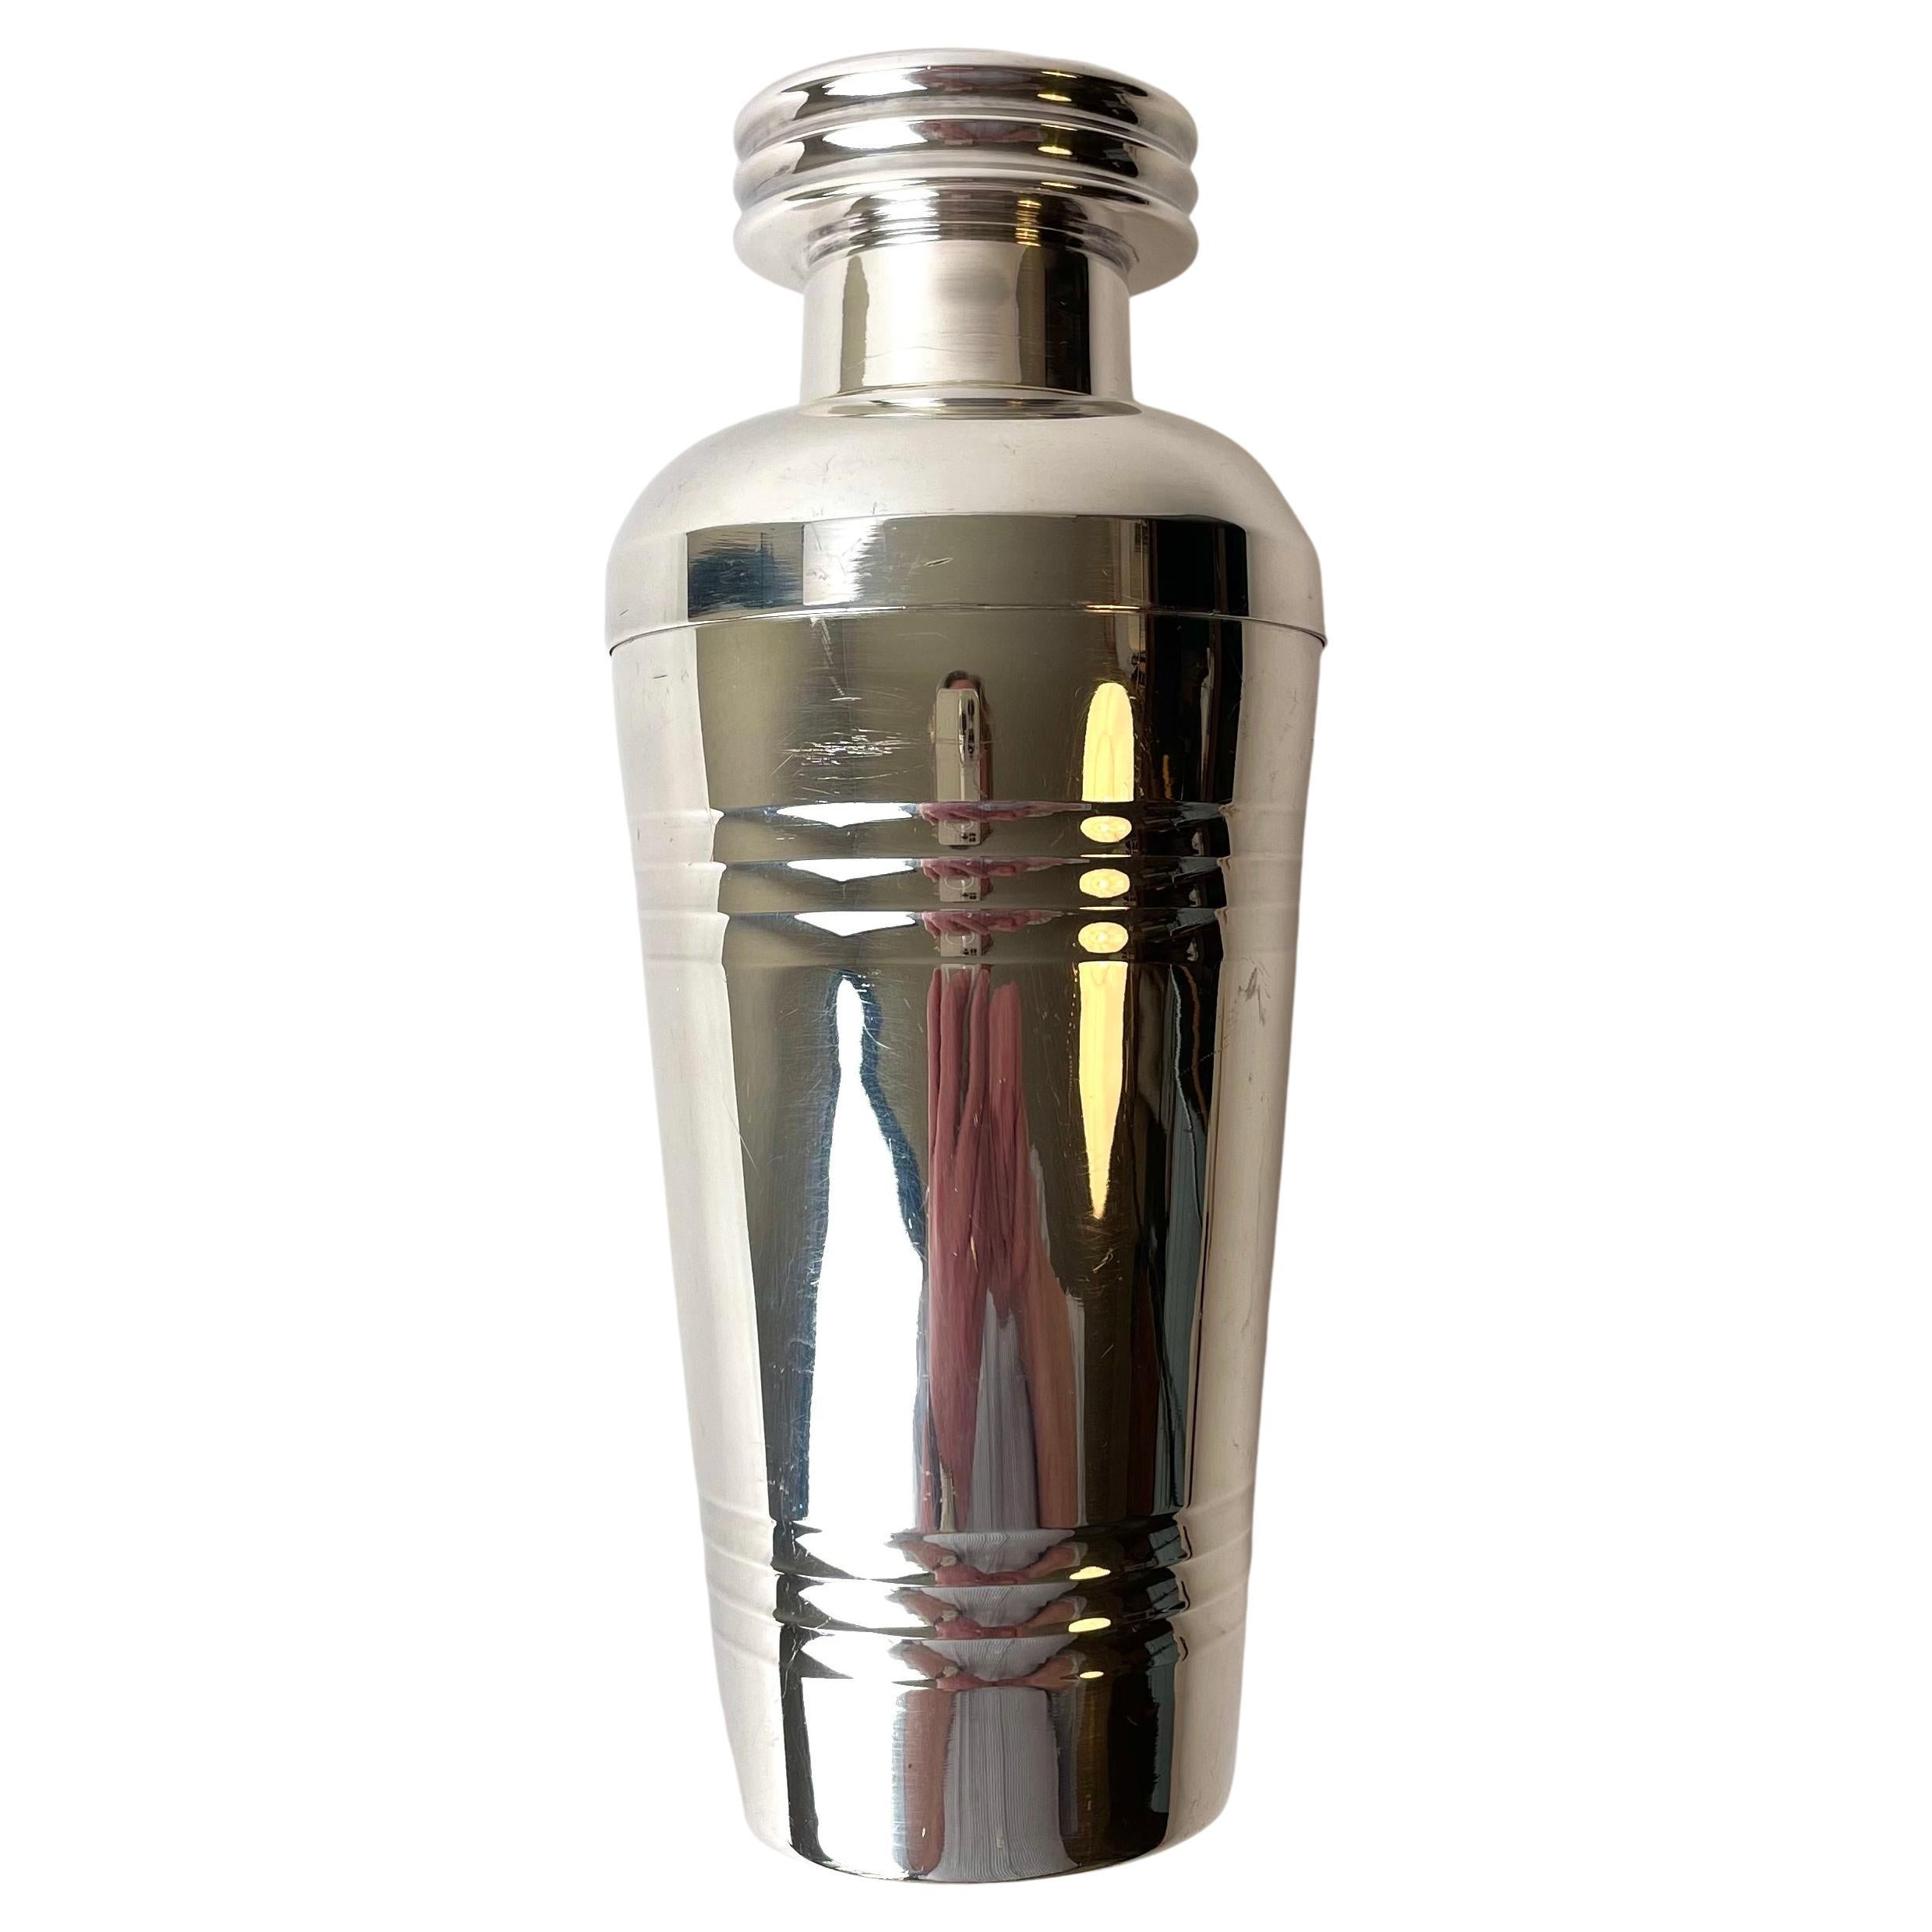 Large Art Deco Silver Plated Cocktail Shaker from the 1920s